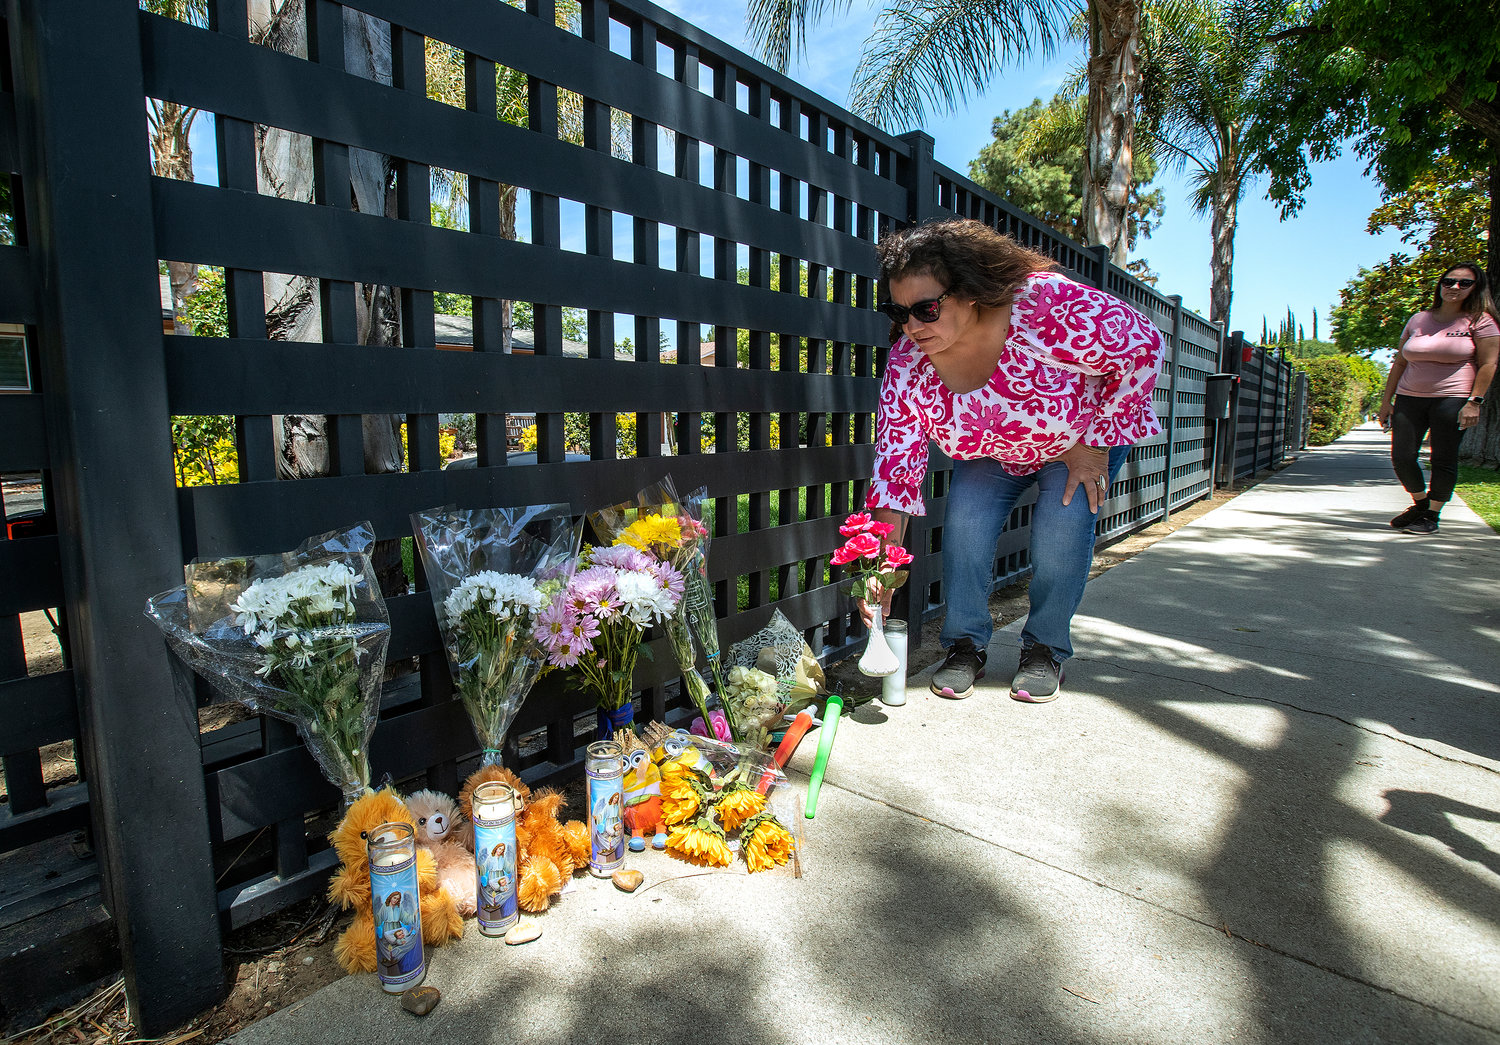 Lupeann Campos of Winnetka, California, places flowers at a memorial in front of a home on Victory Boulevard in West Hills. Three children were found dead inside the residence Sunday, May 8, 2022. (Mel Melcon/Los Angeles Times/TNS)